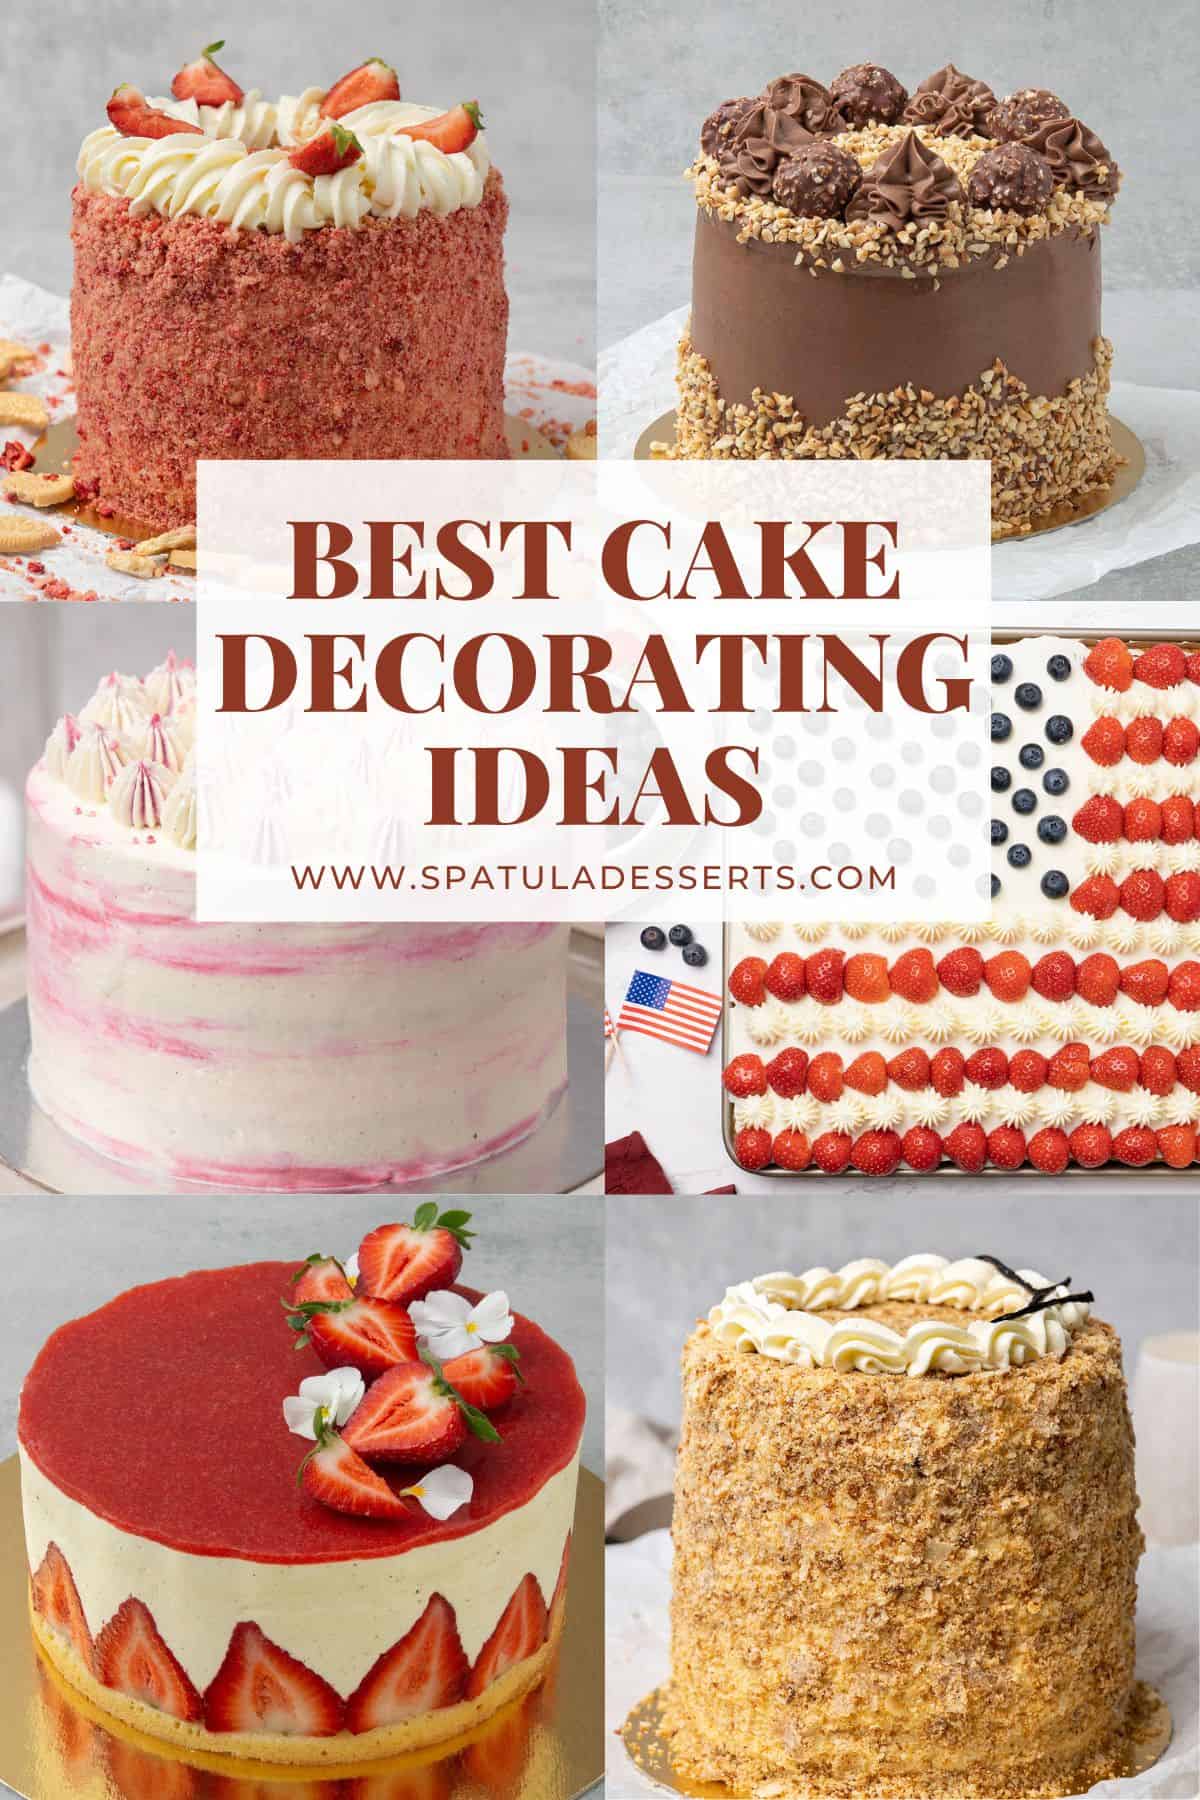 Cake decorating ideas recipes collection.